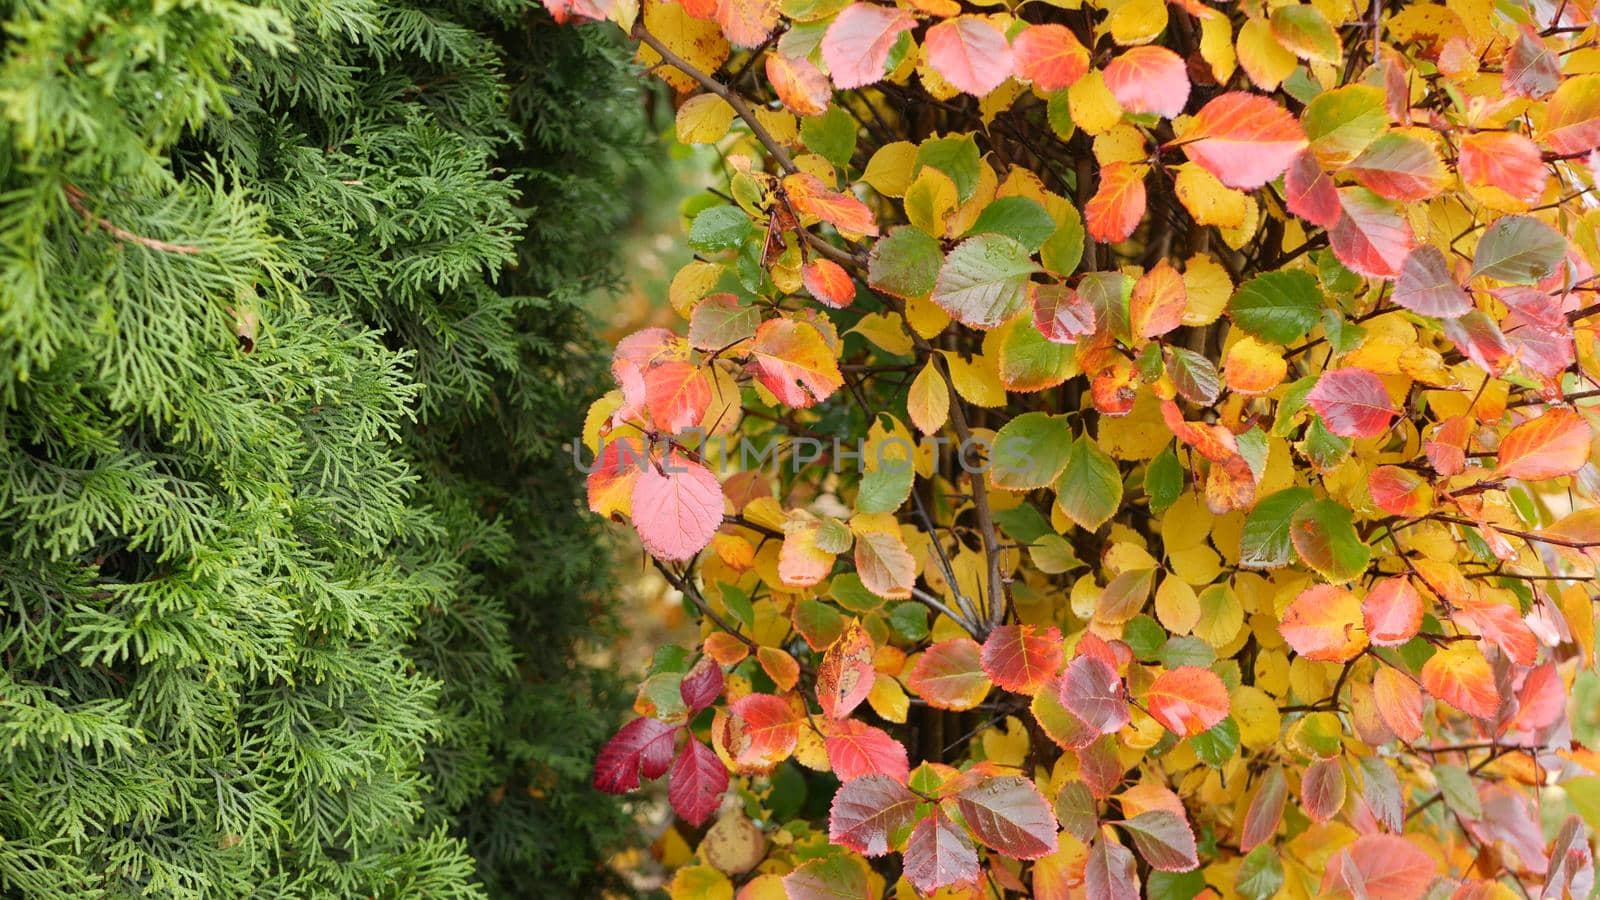 Yellow autumn leaves, orange fall leaf in ornamental garden. Leafage in park in september, october or november. Seasonal colorful foliage. Natural floral background. Trimmed bush or shrub plant wall.